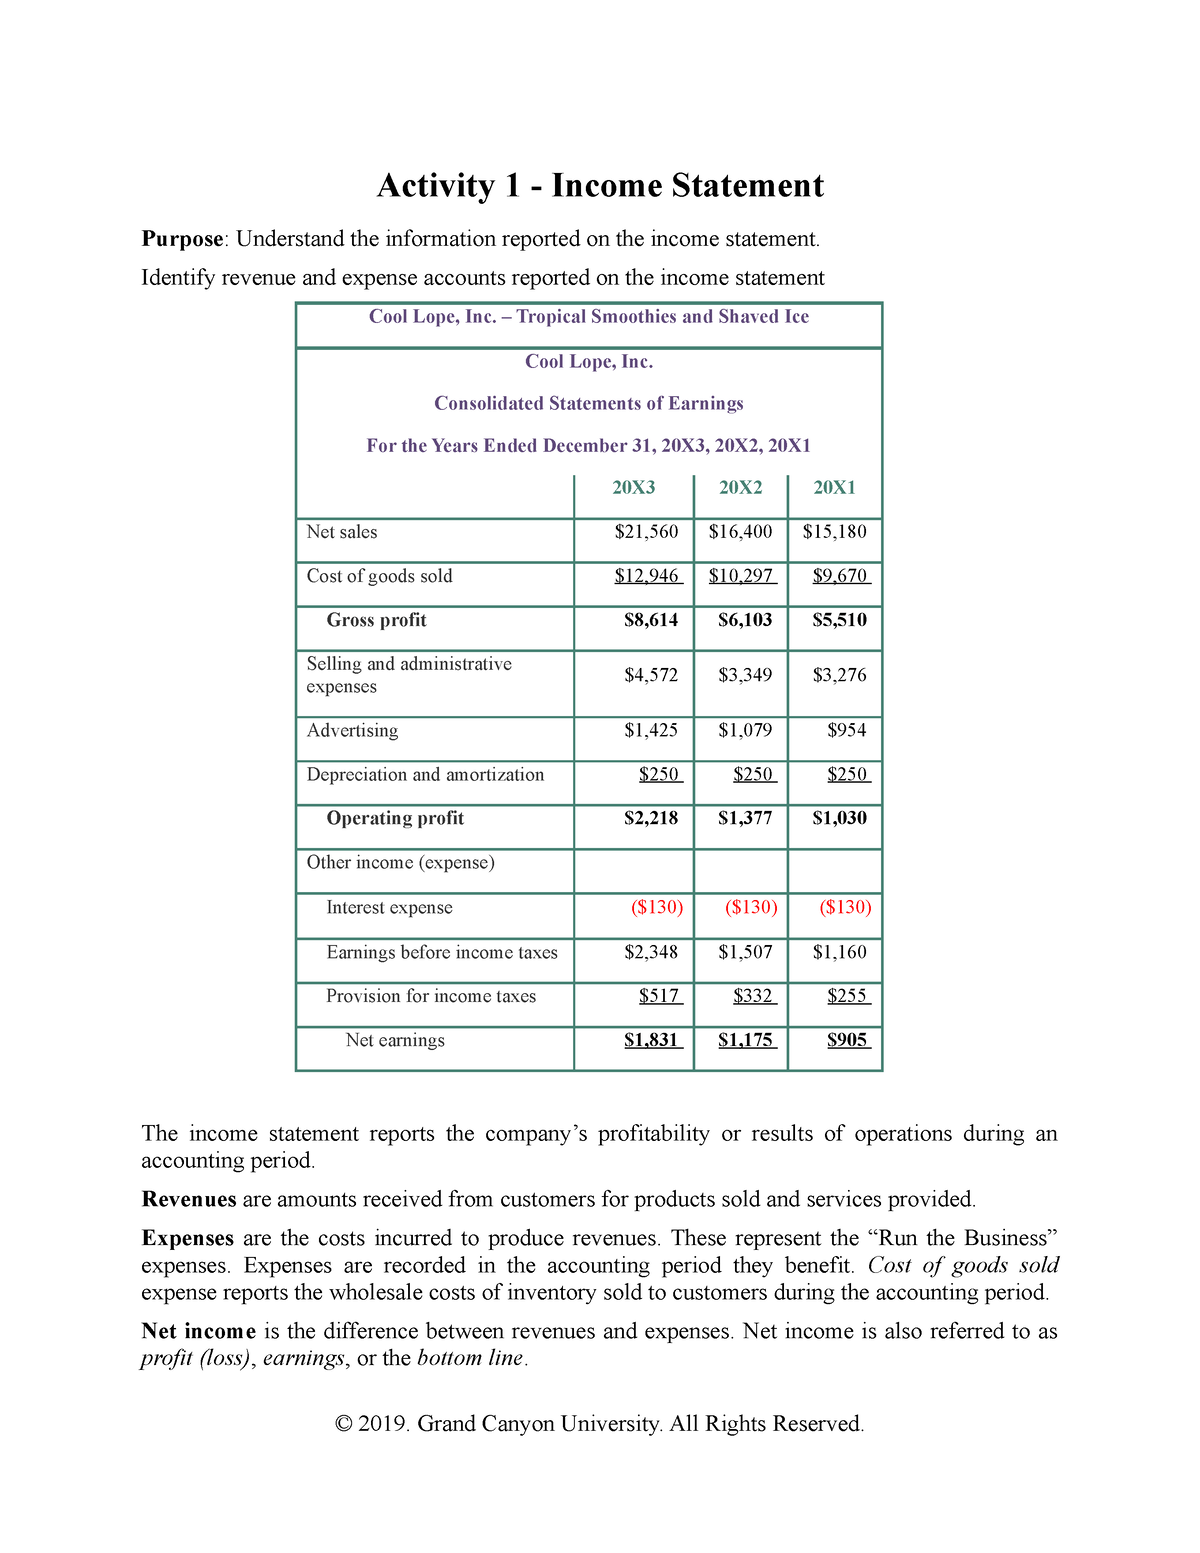 ACC-486-RS-Income Statement Activity 1-Student - Activity 1 - Income ...